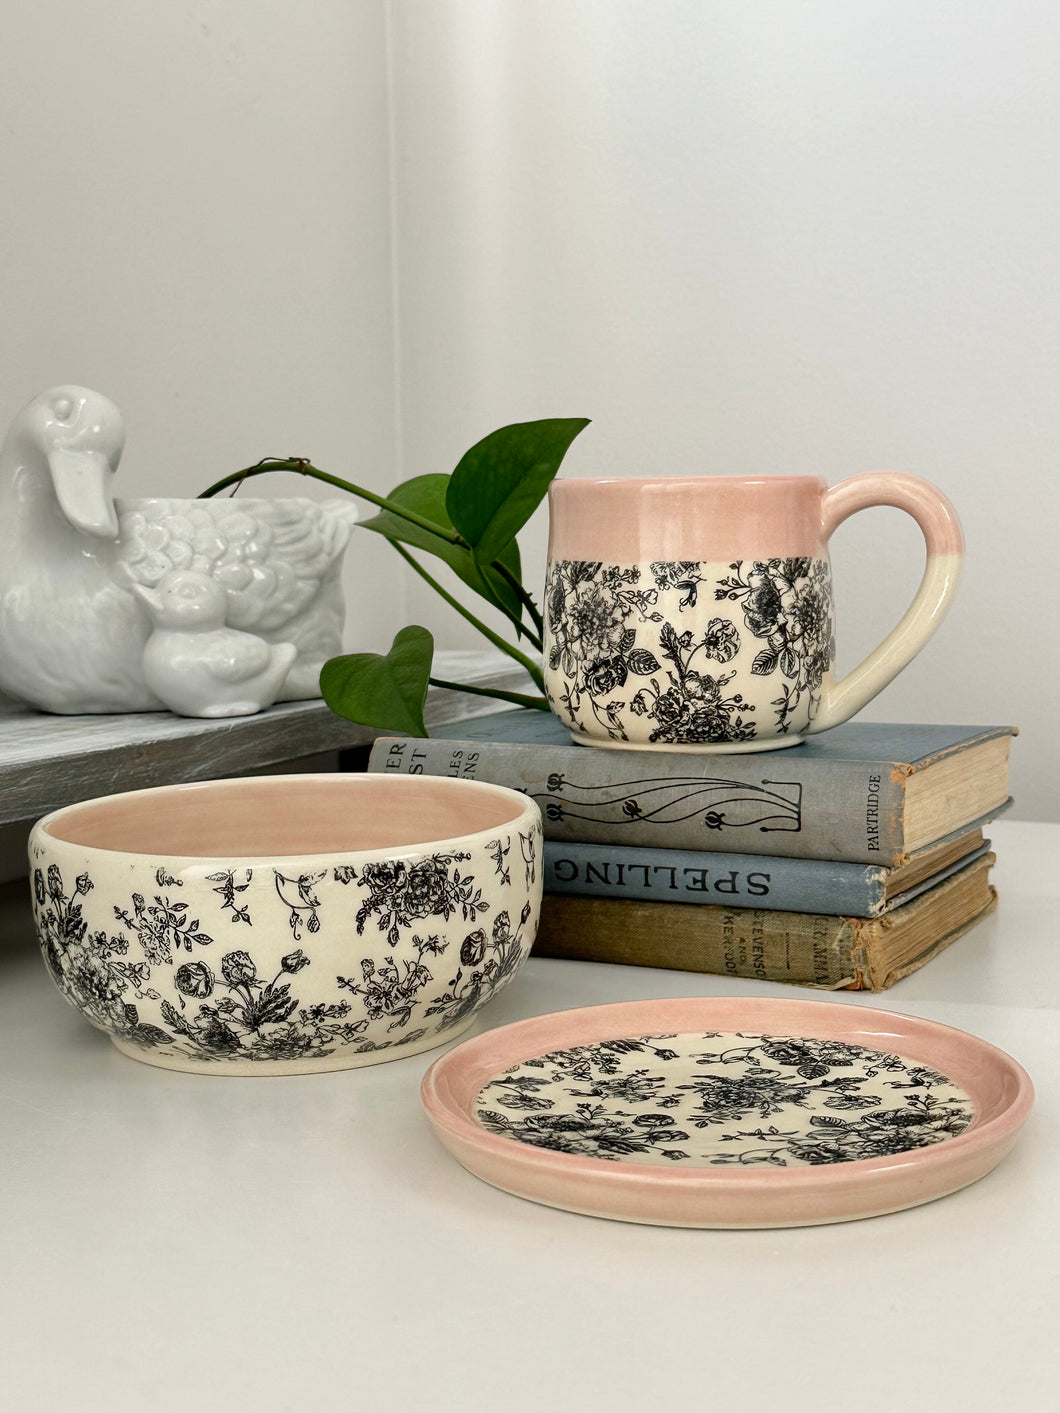 #016 - 3 piece set - Small snack plate, small dessert bowl, and 14 oz. mug with floral bouquet pattern and pink rim